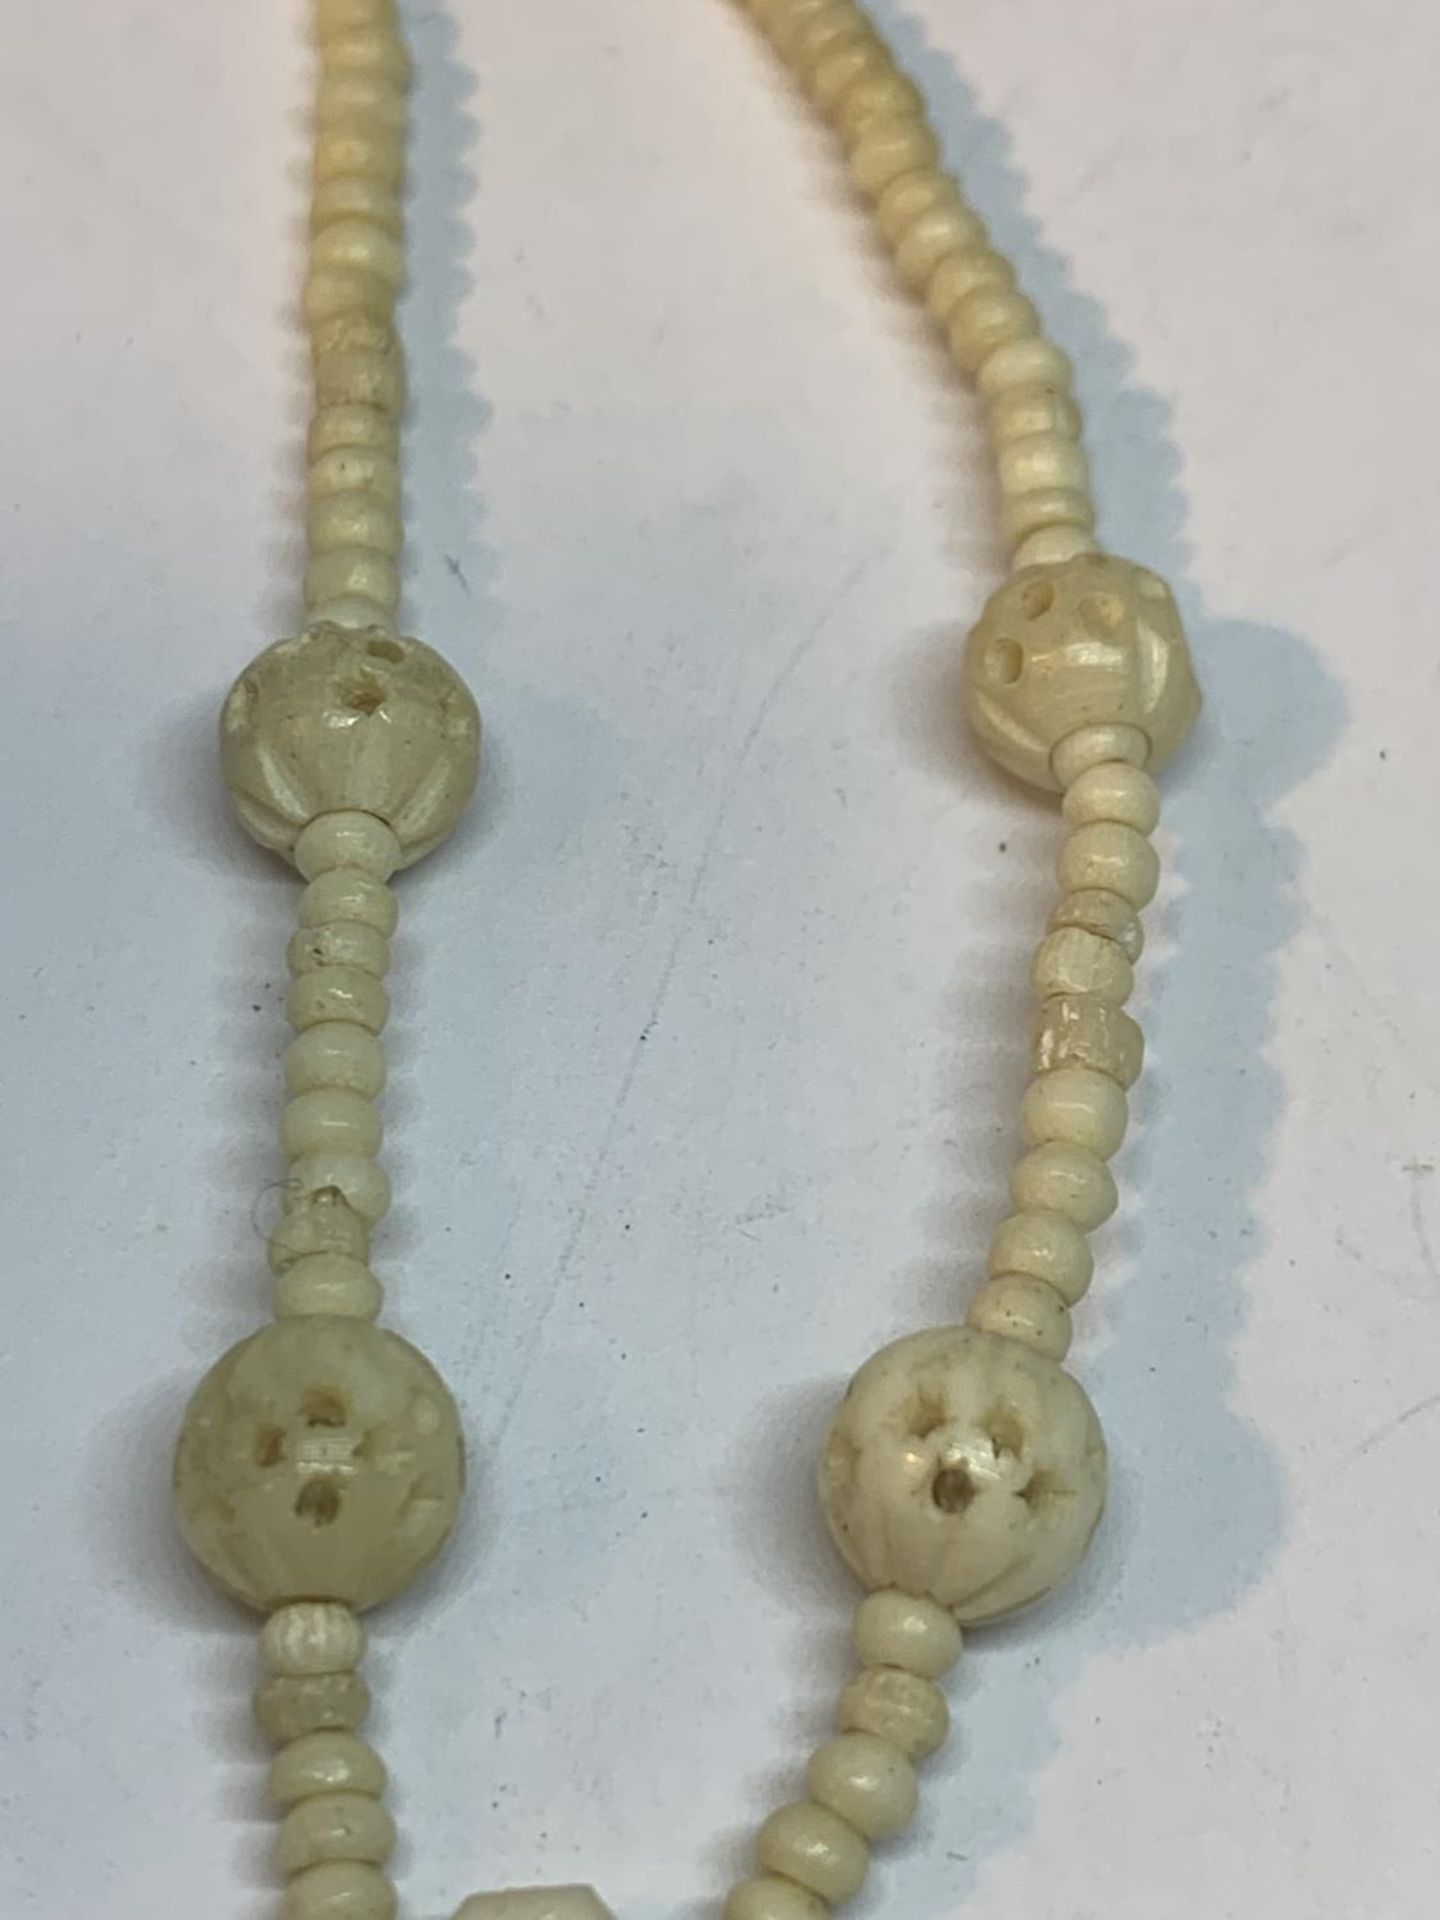 TWO CARVED BONE NECKLACES ONE WITH LARGE FOB AND ONE WITH A CROSS DESIGN - Image 3 of 7